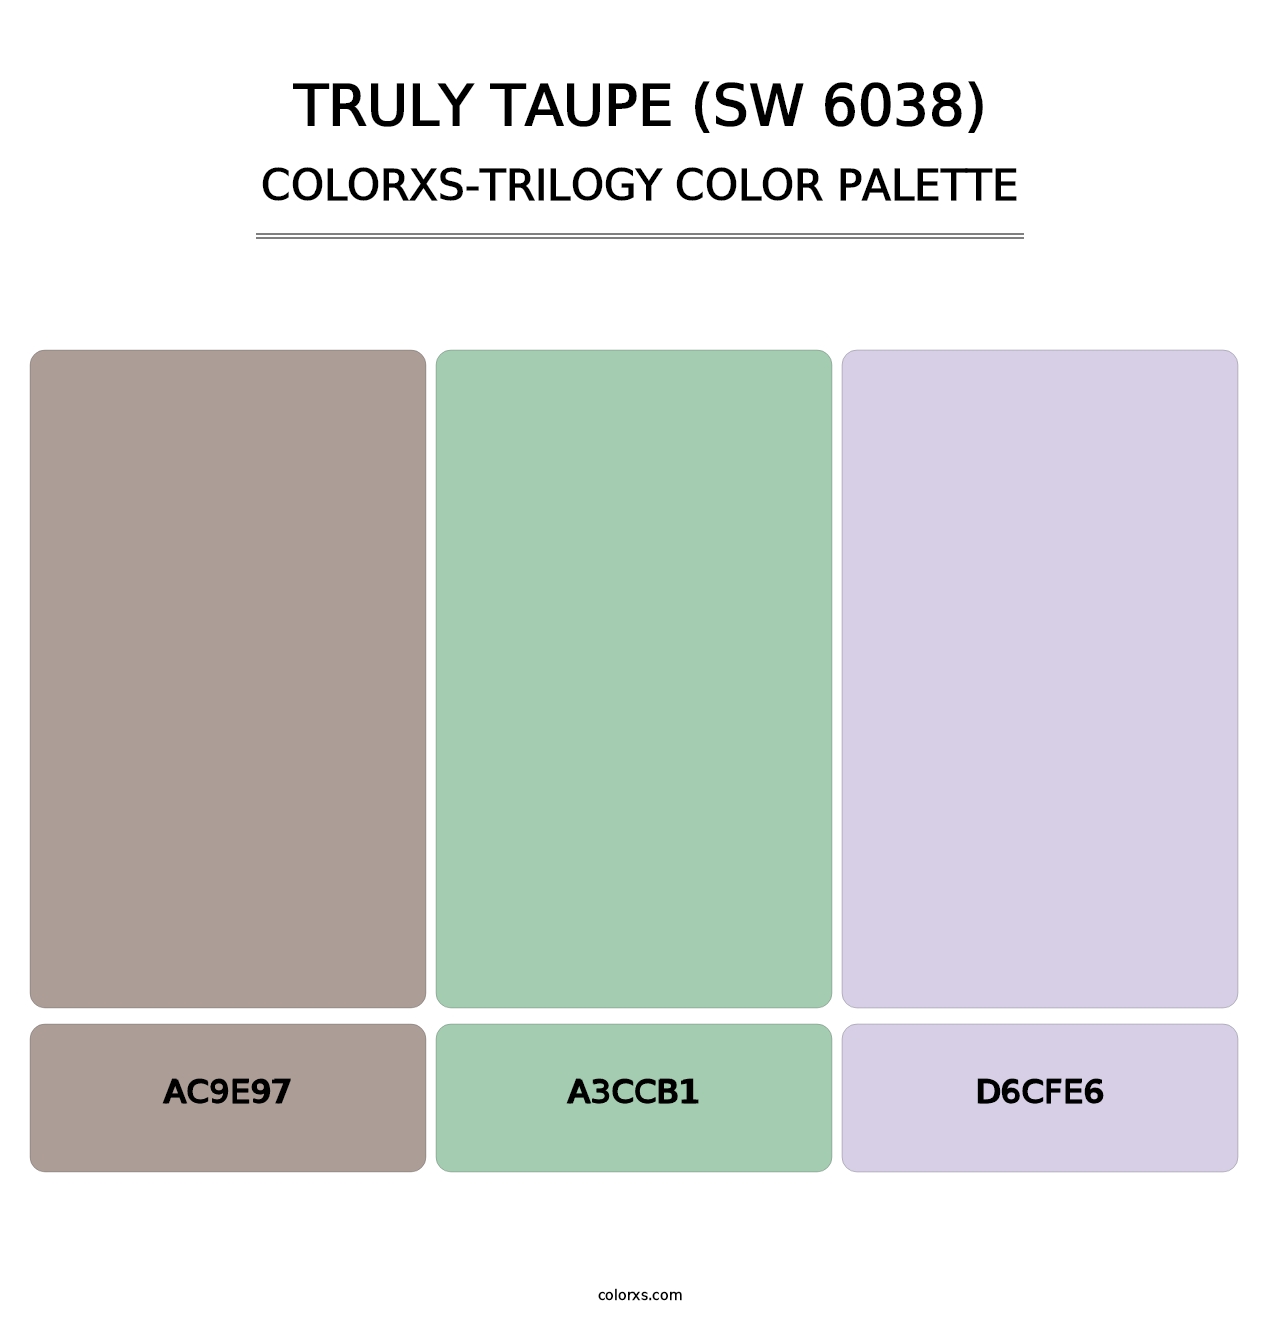 Truly Taupe (SW 6038) - Colorxs Trilogy Palette